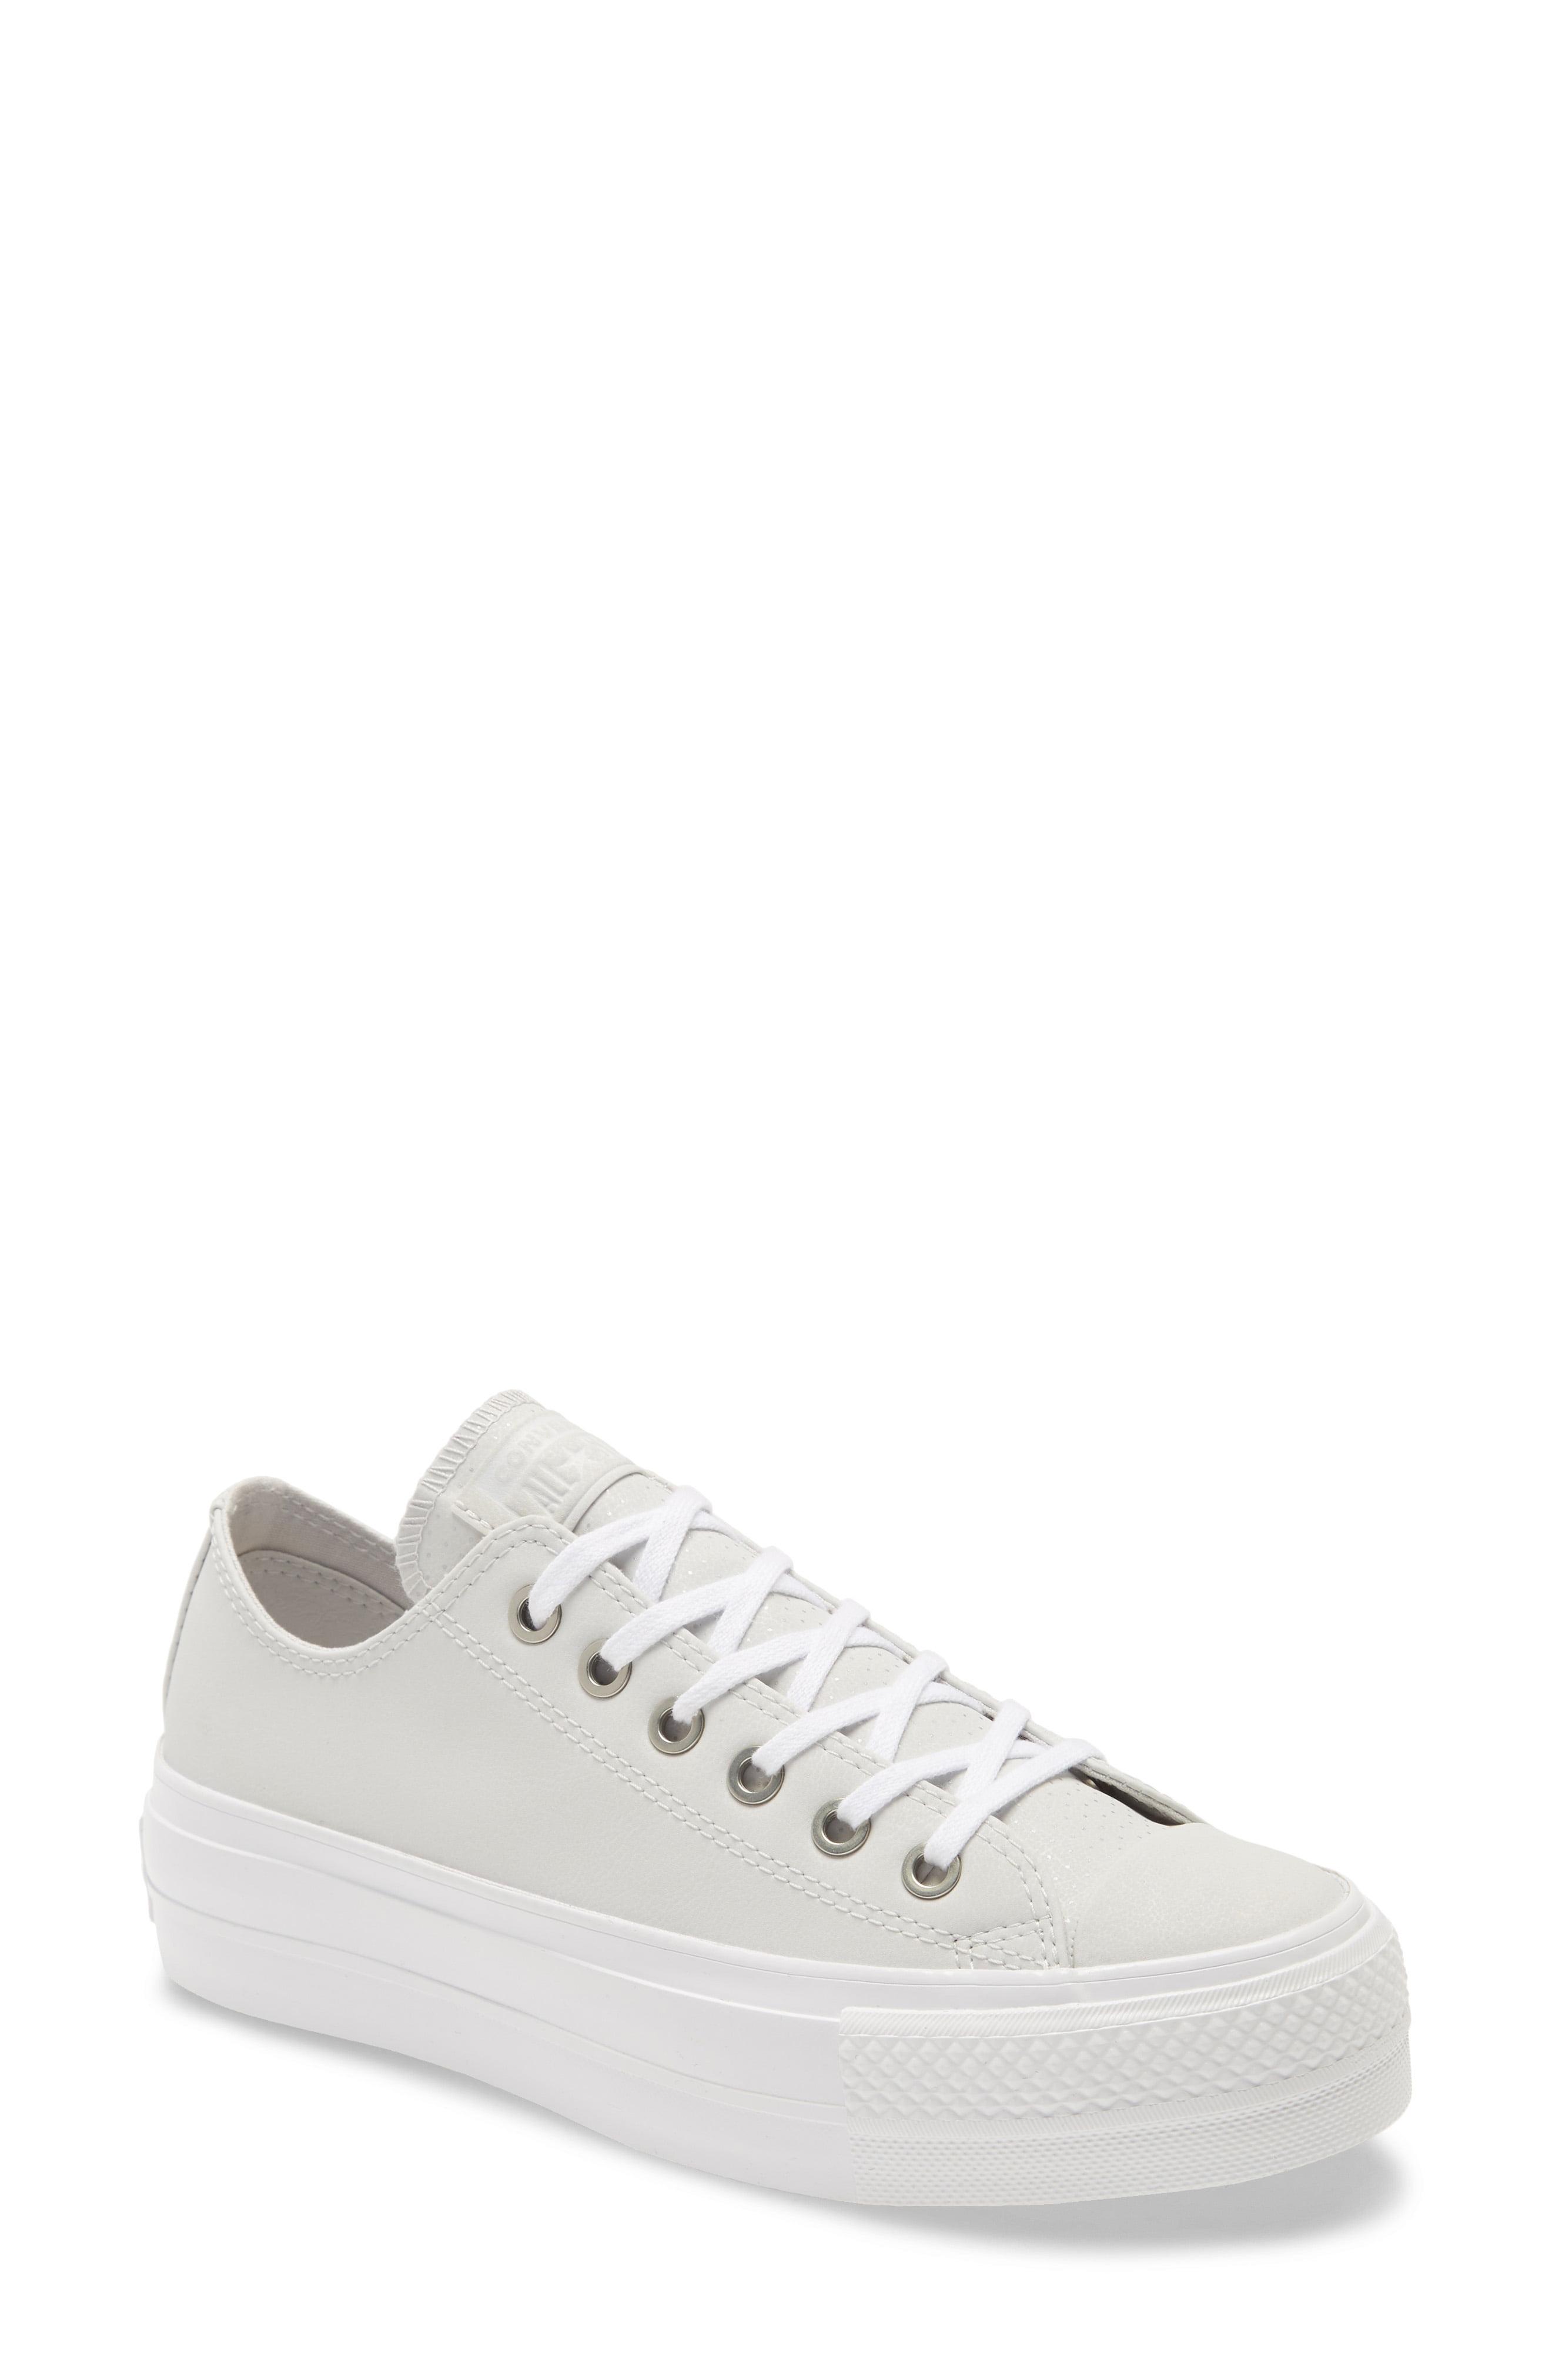 Converse Chuck Taylor All Star Lift Ox Platform Sneaker in White - Lyst